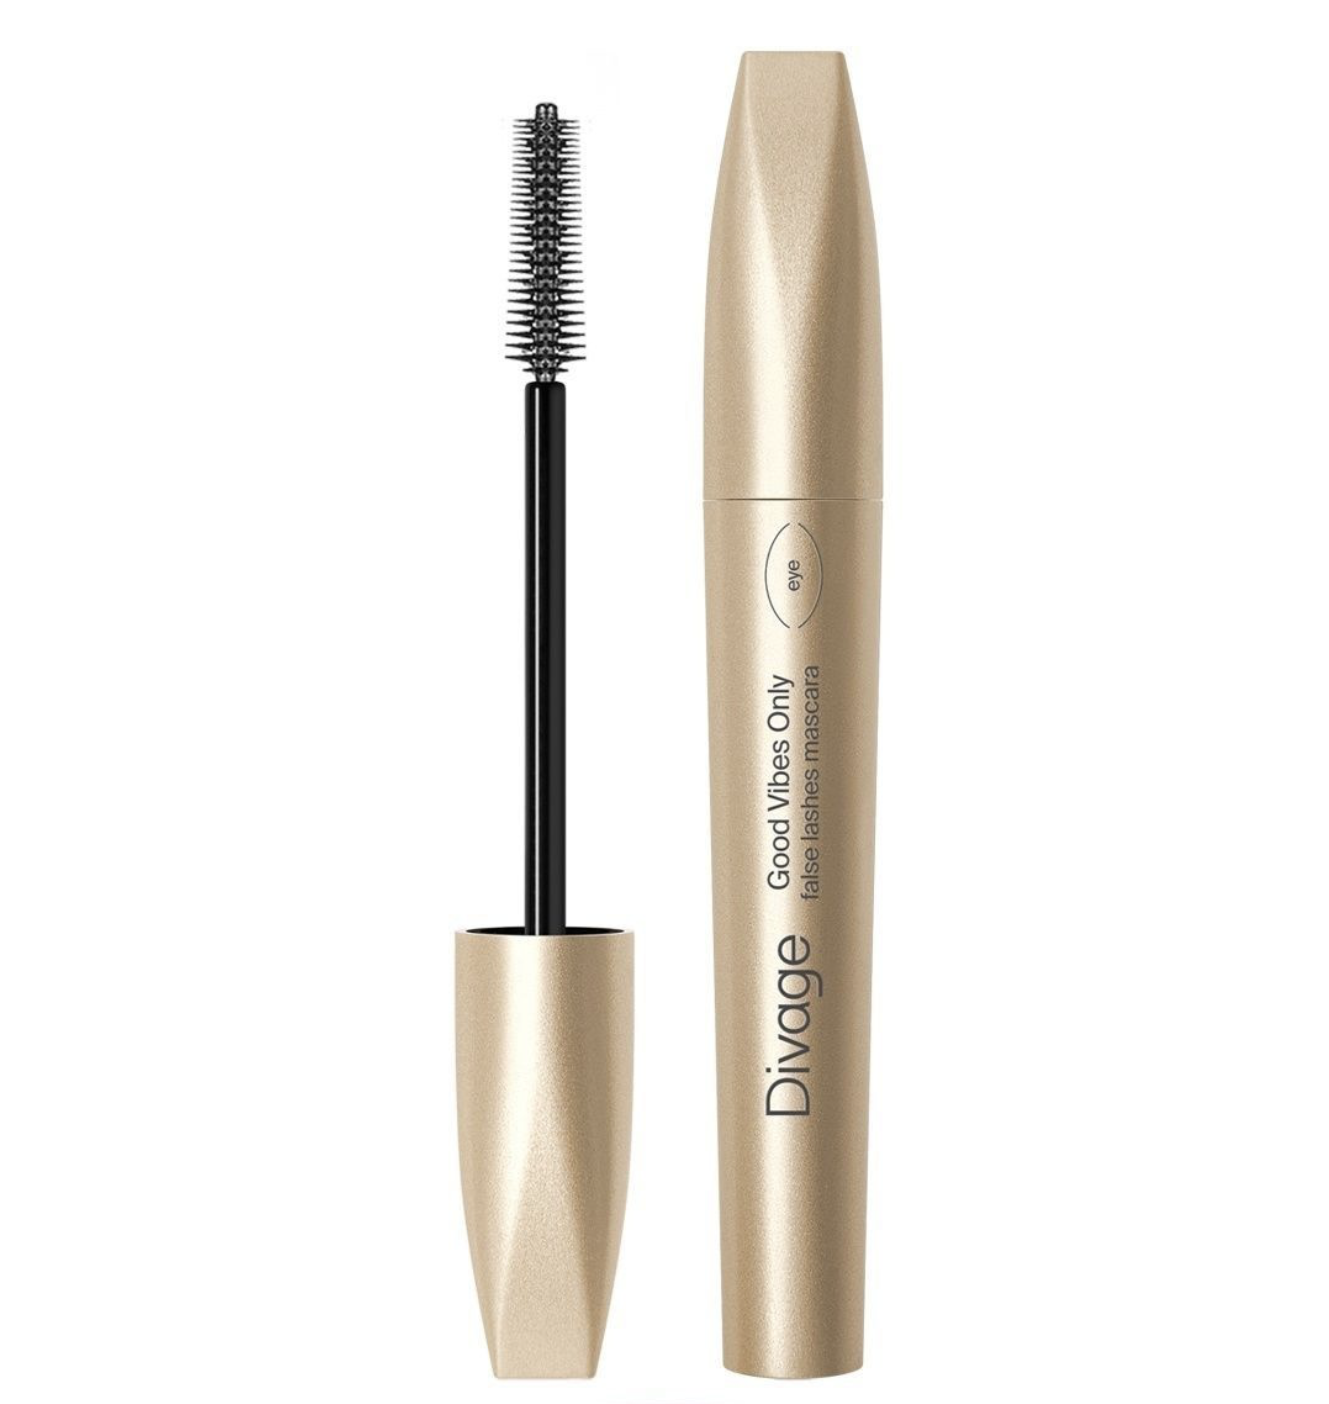   / Divage -    Good Vibes Only false lashes mascara  10 